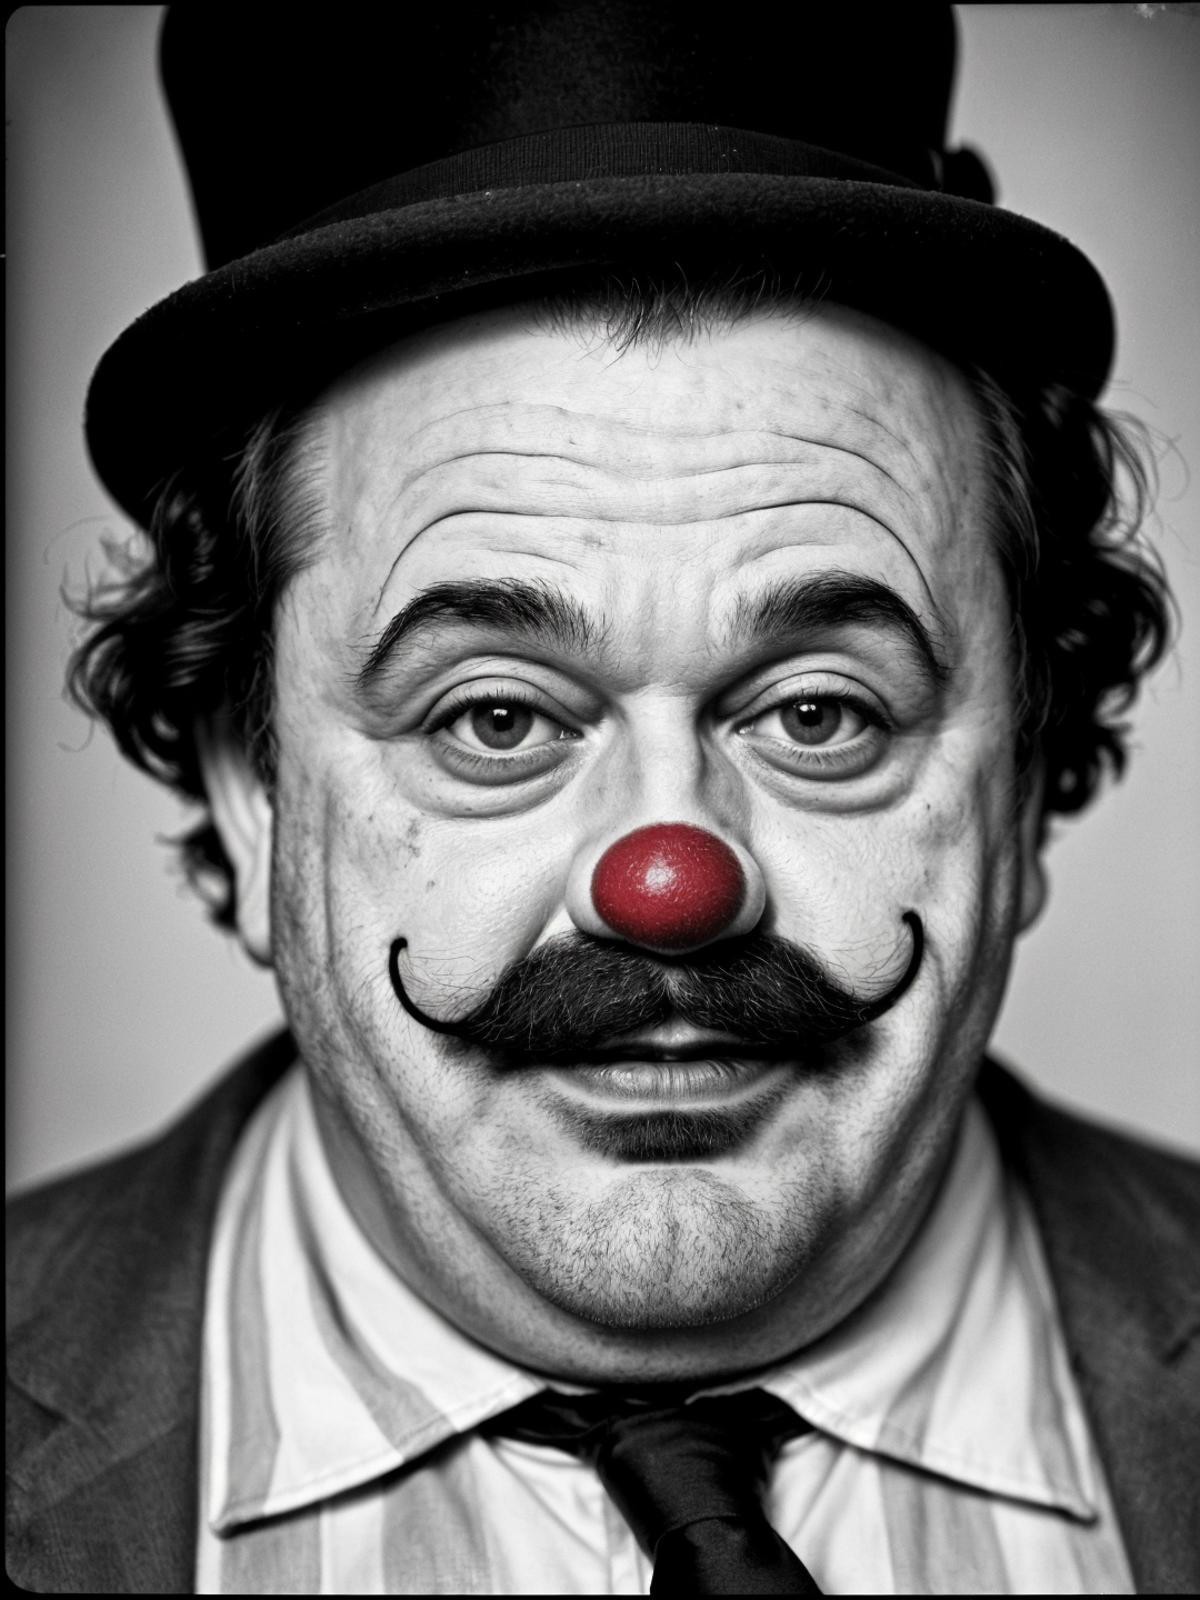 A man wearing a top hat and a clown nose.